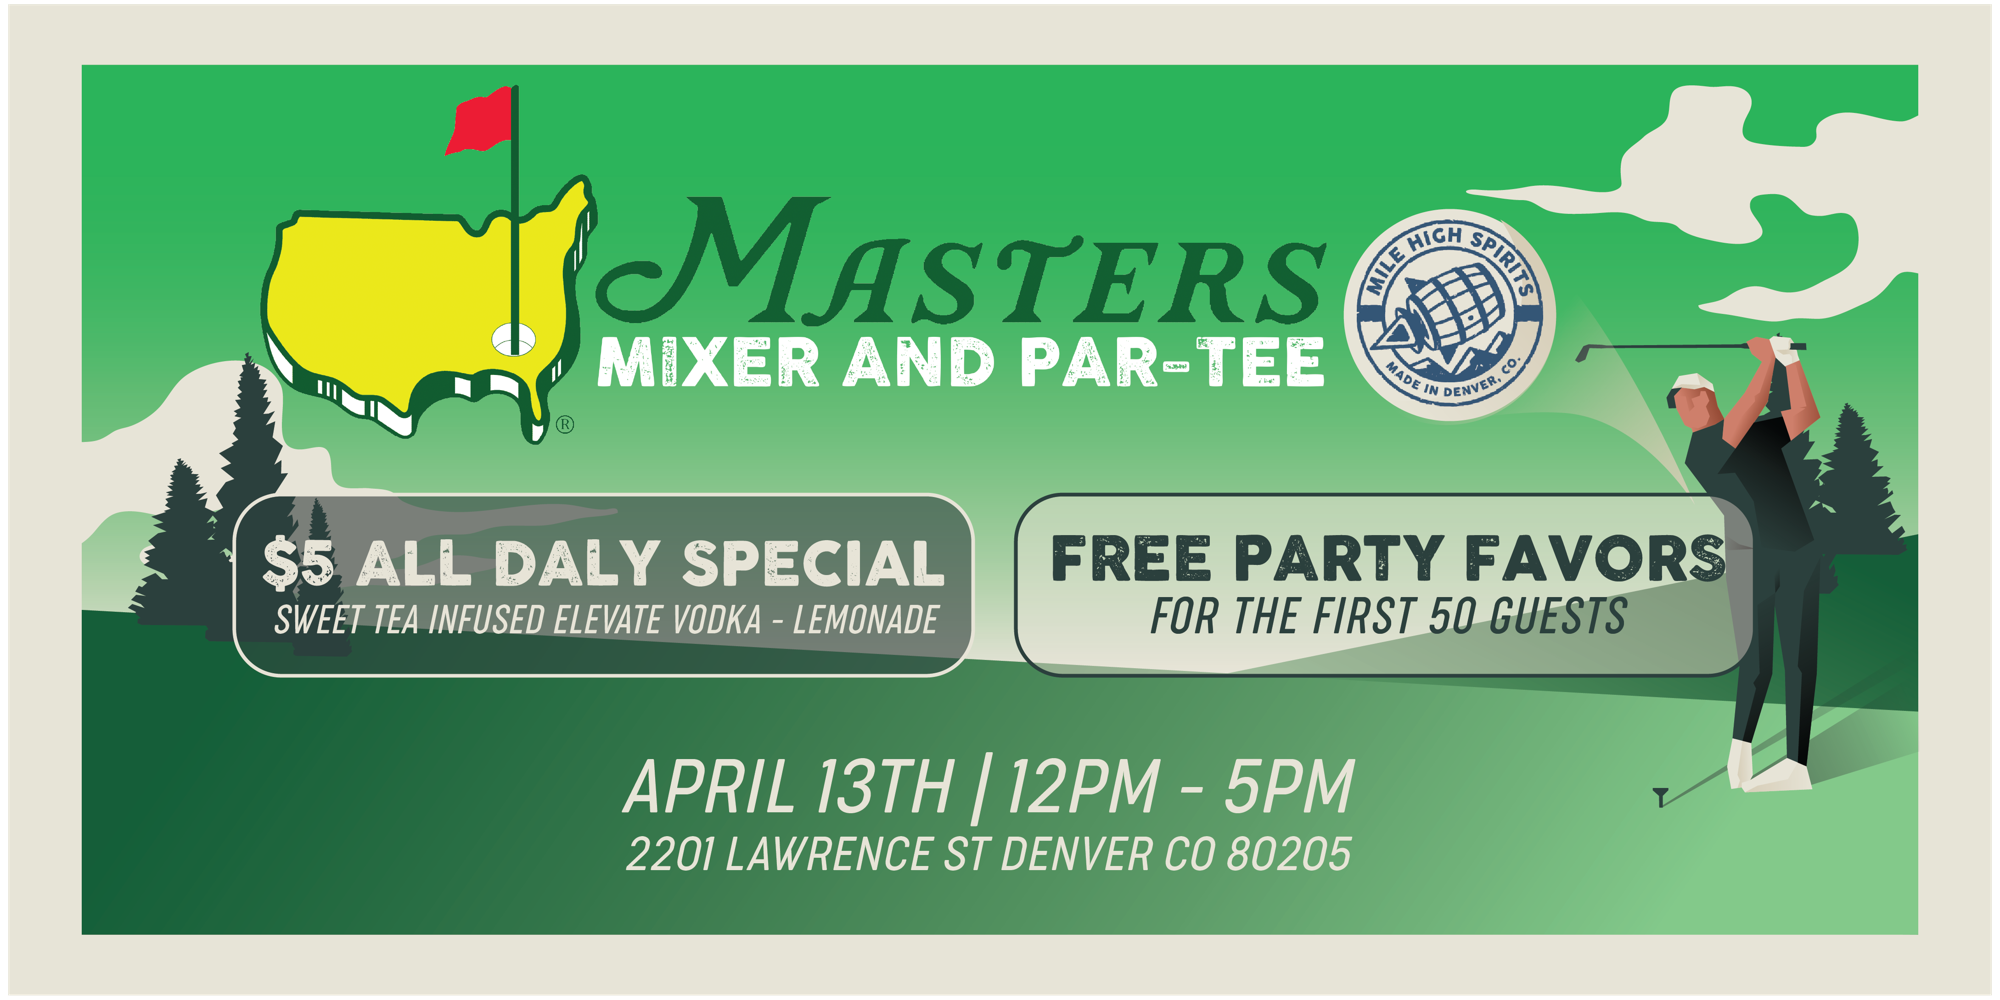 Masters Mixer and "Par-Tee" promotional image